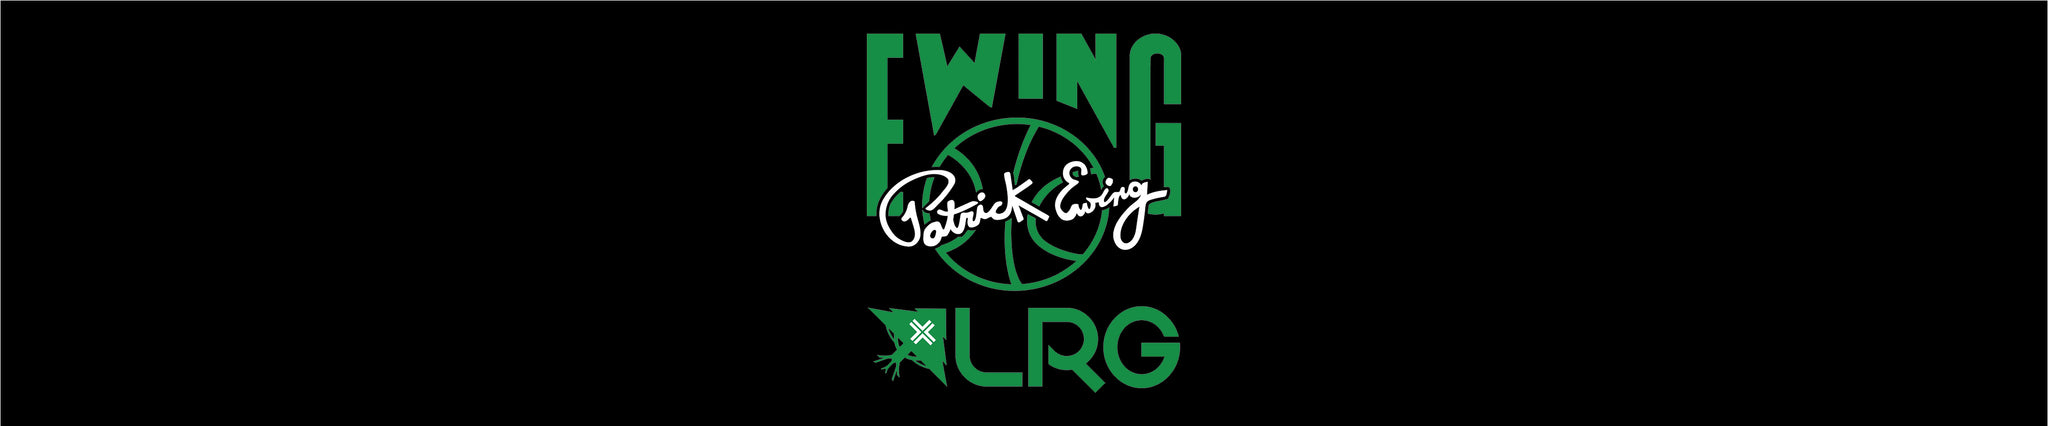 LRG X EWING COLLECTION